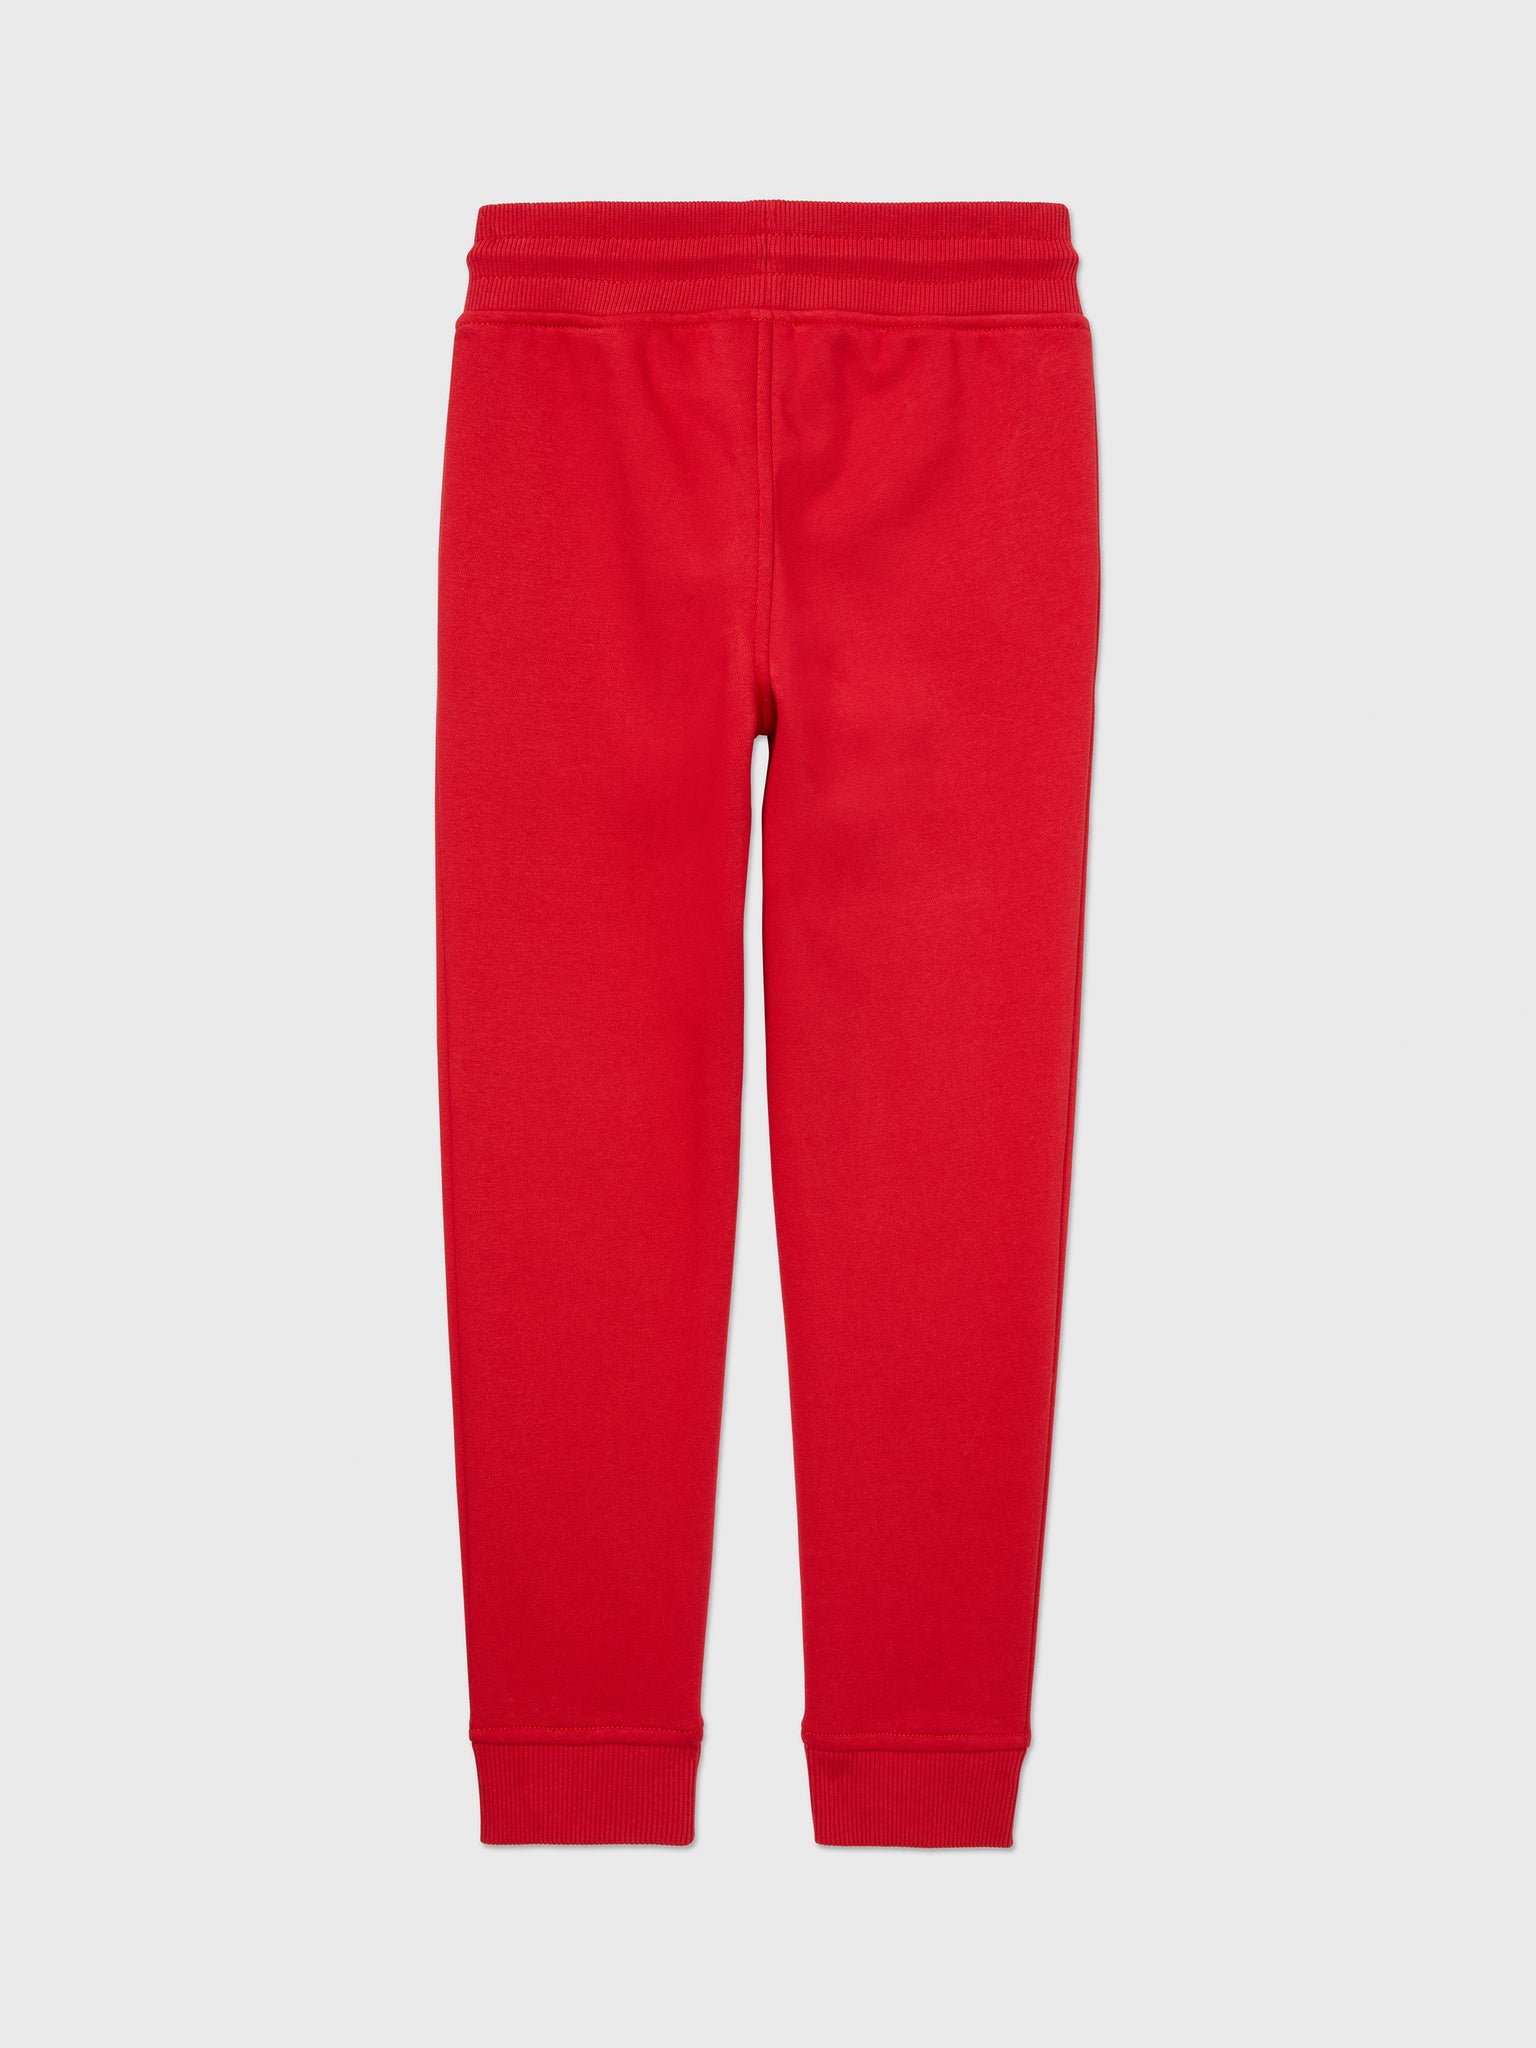 Seated Fit Solid Sweatpant (Kids) - Blush Red